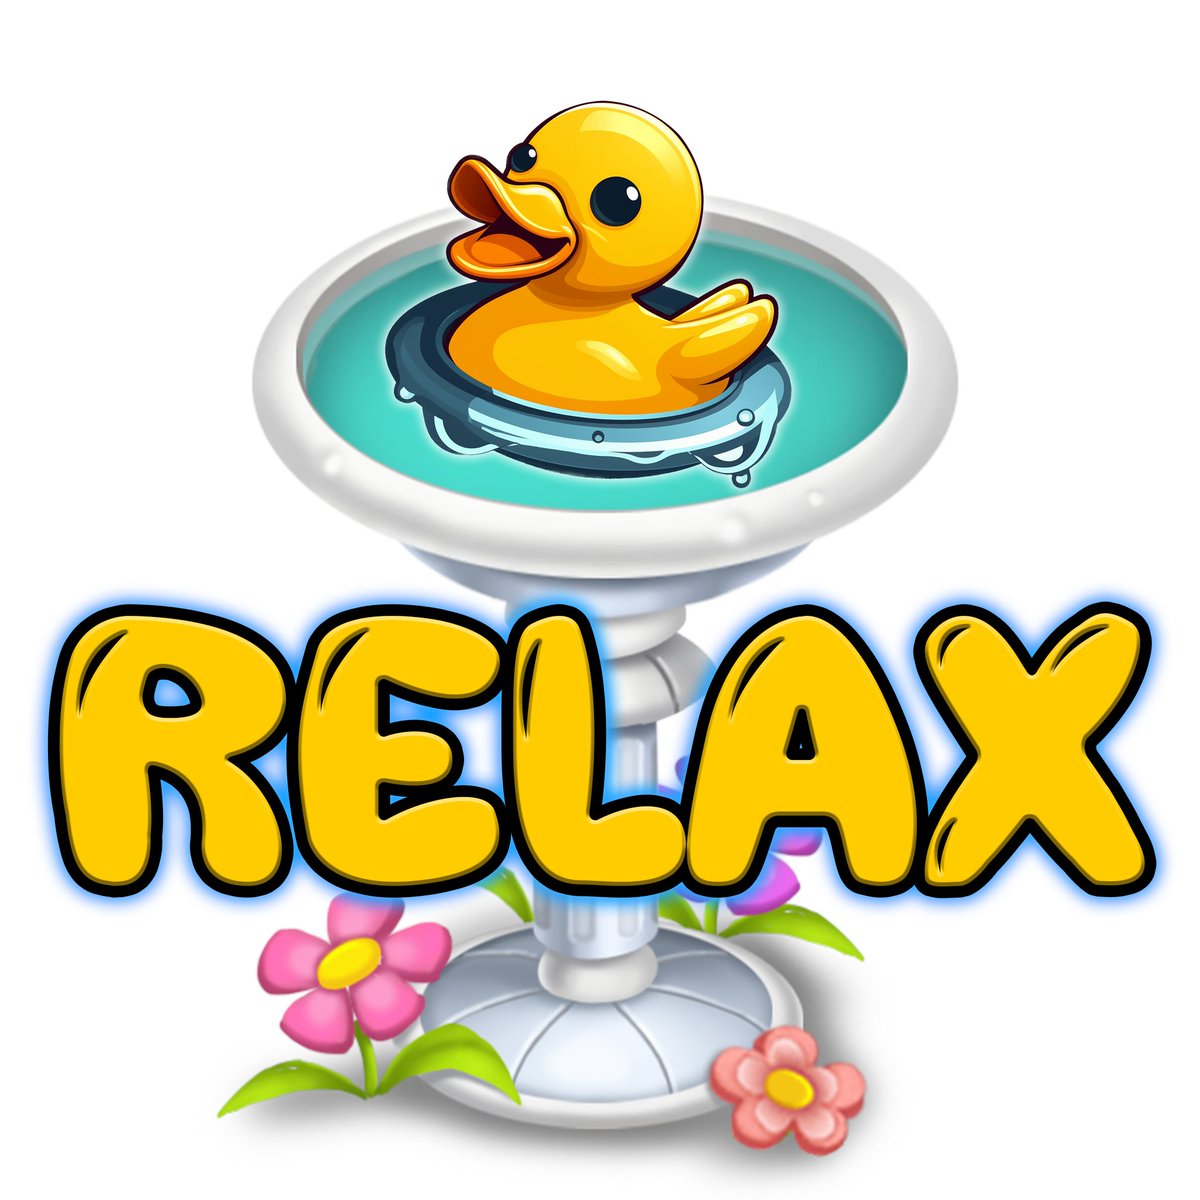 #Relax #TheDuck is #LaunchingSoon 👍🚀

#QuackToken